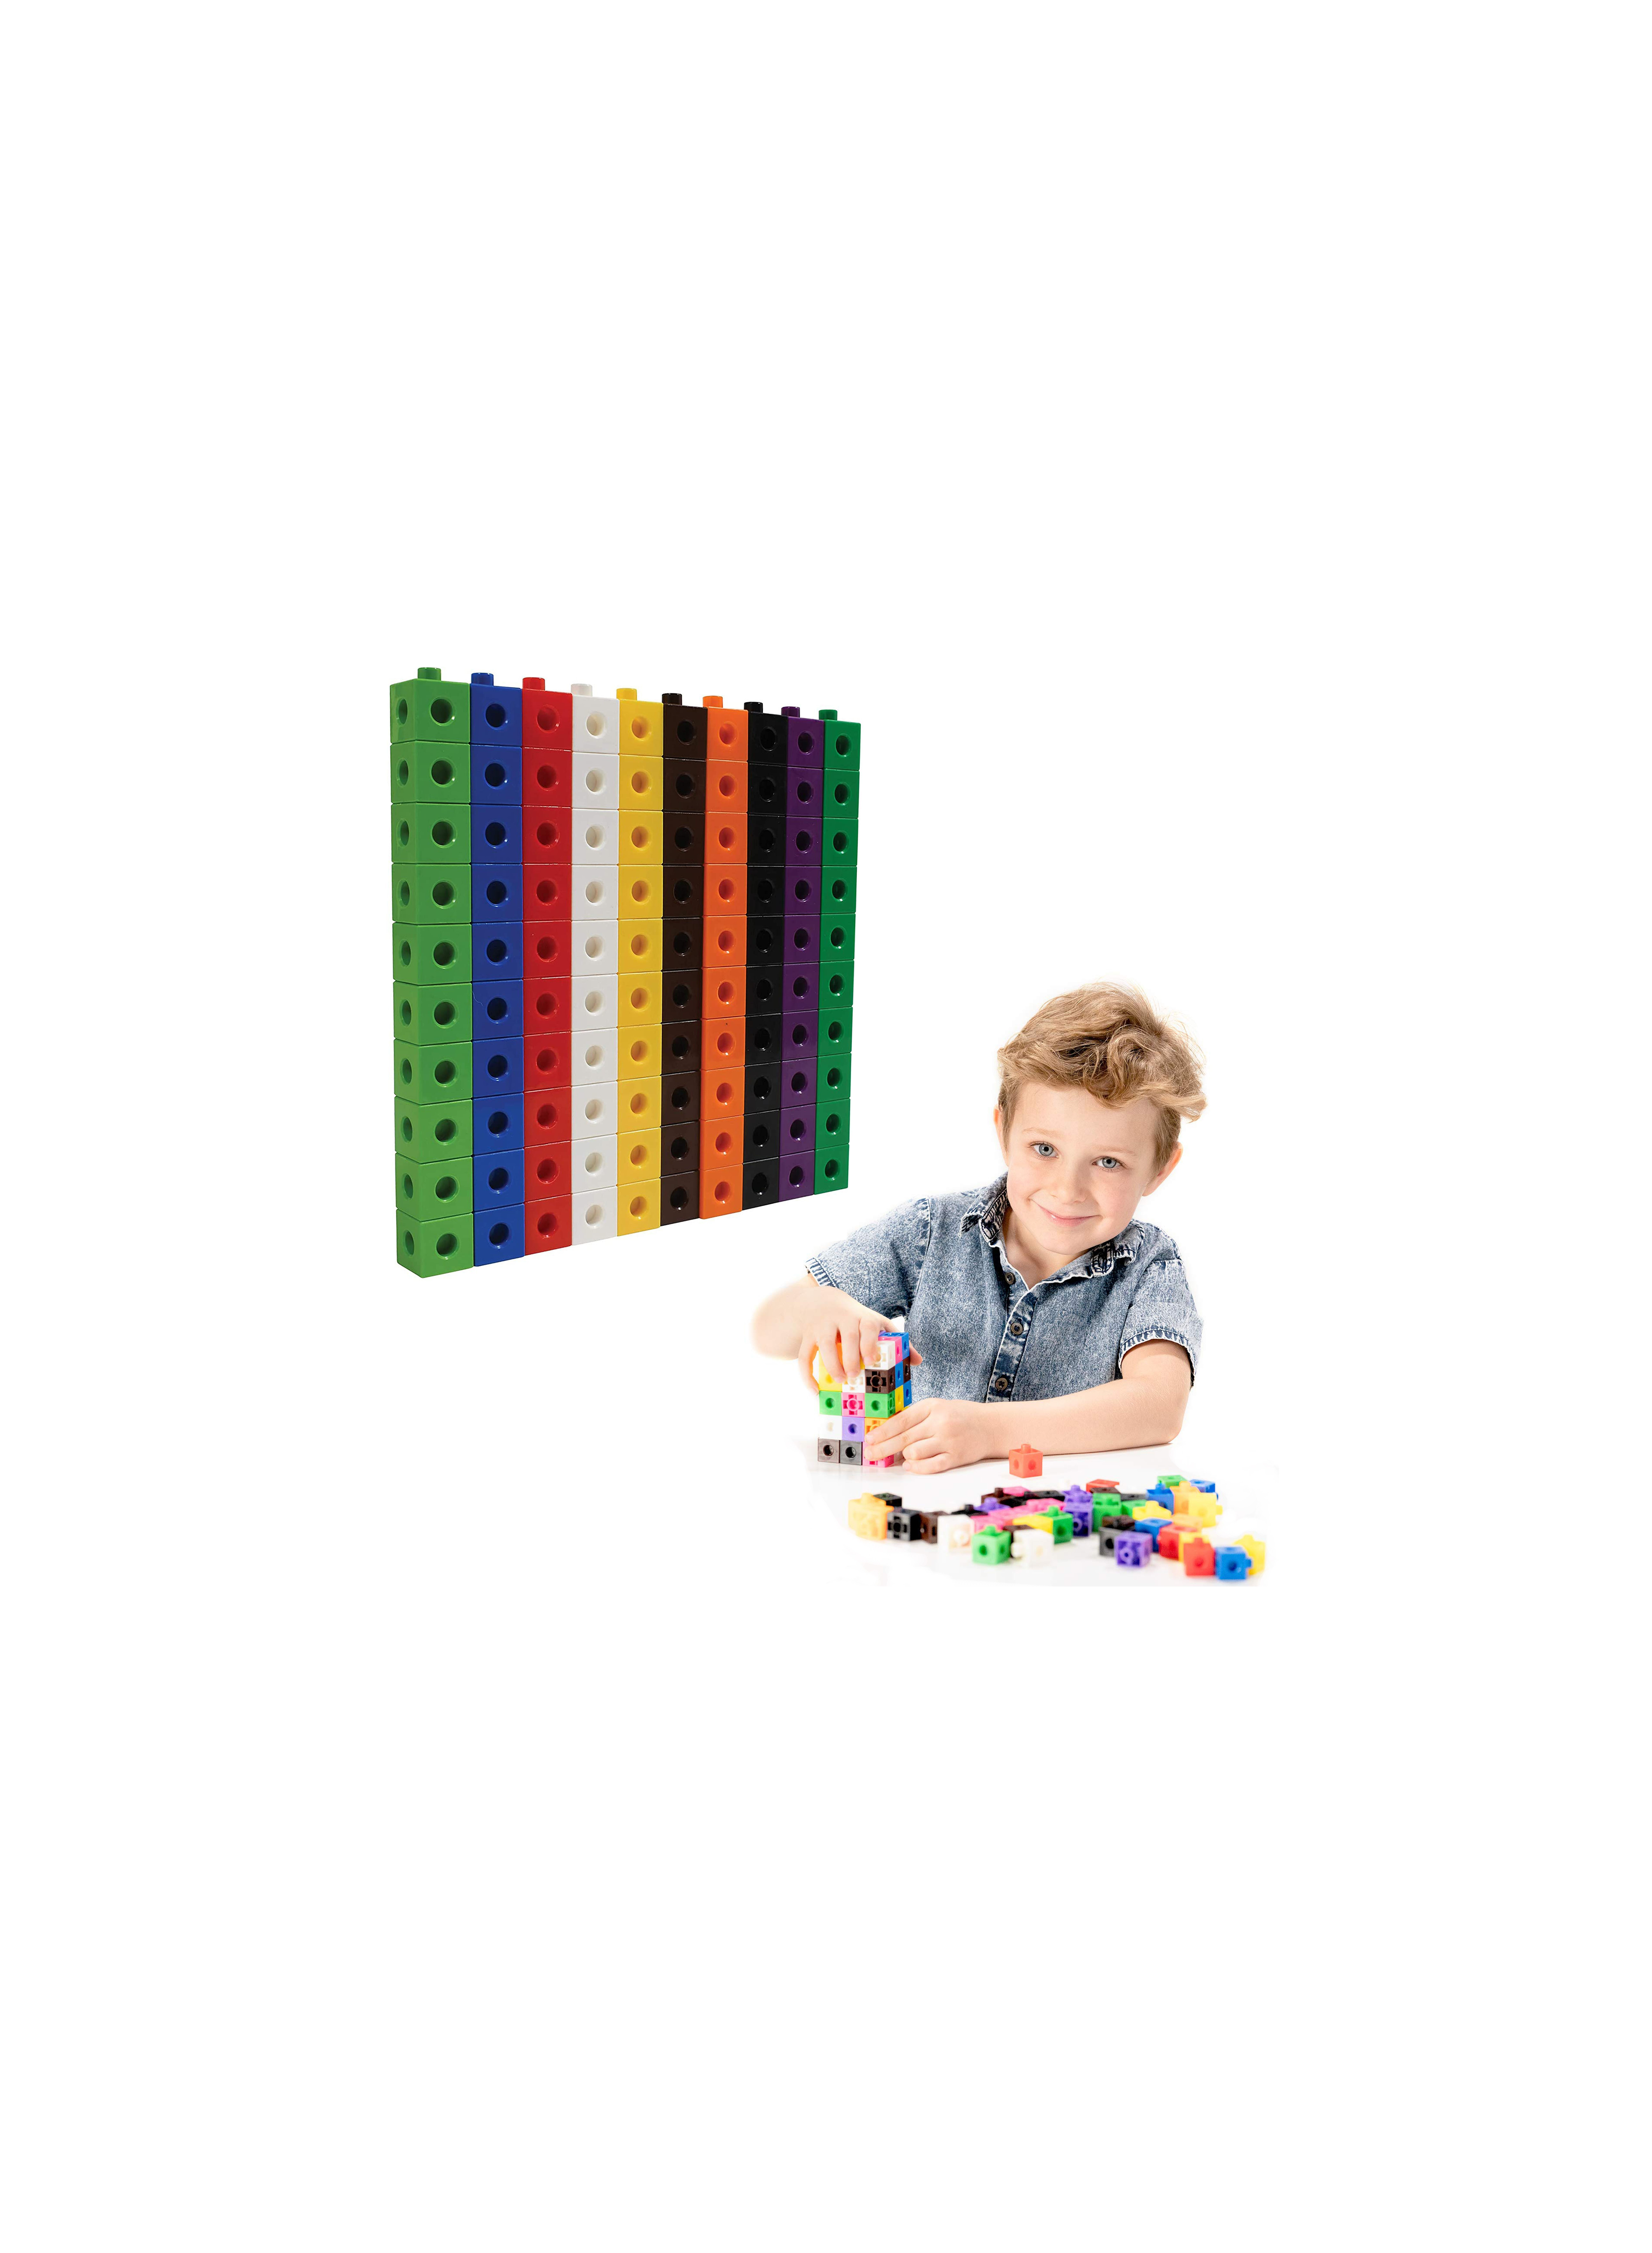 Plastic Linking Cubes Individual Kit For Kids Ages 5-13, Hands On Math Manipulatives To Learn Numbers, Fractions, And Ratio, Homeschool Supplies (Set of 100)